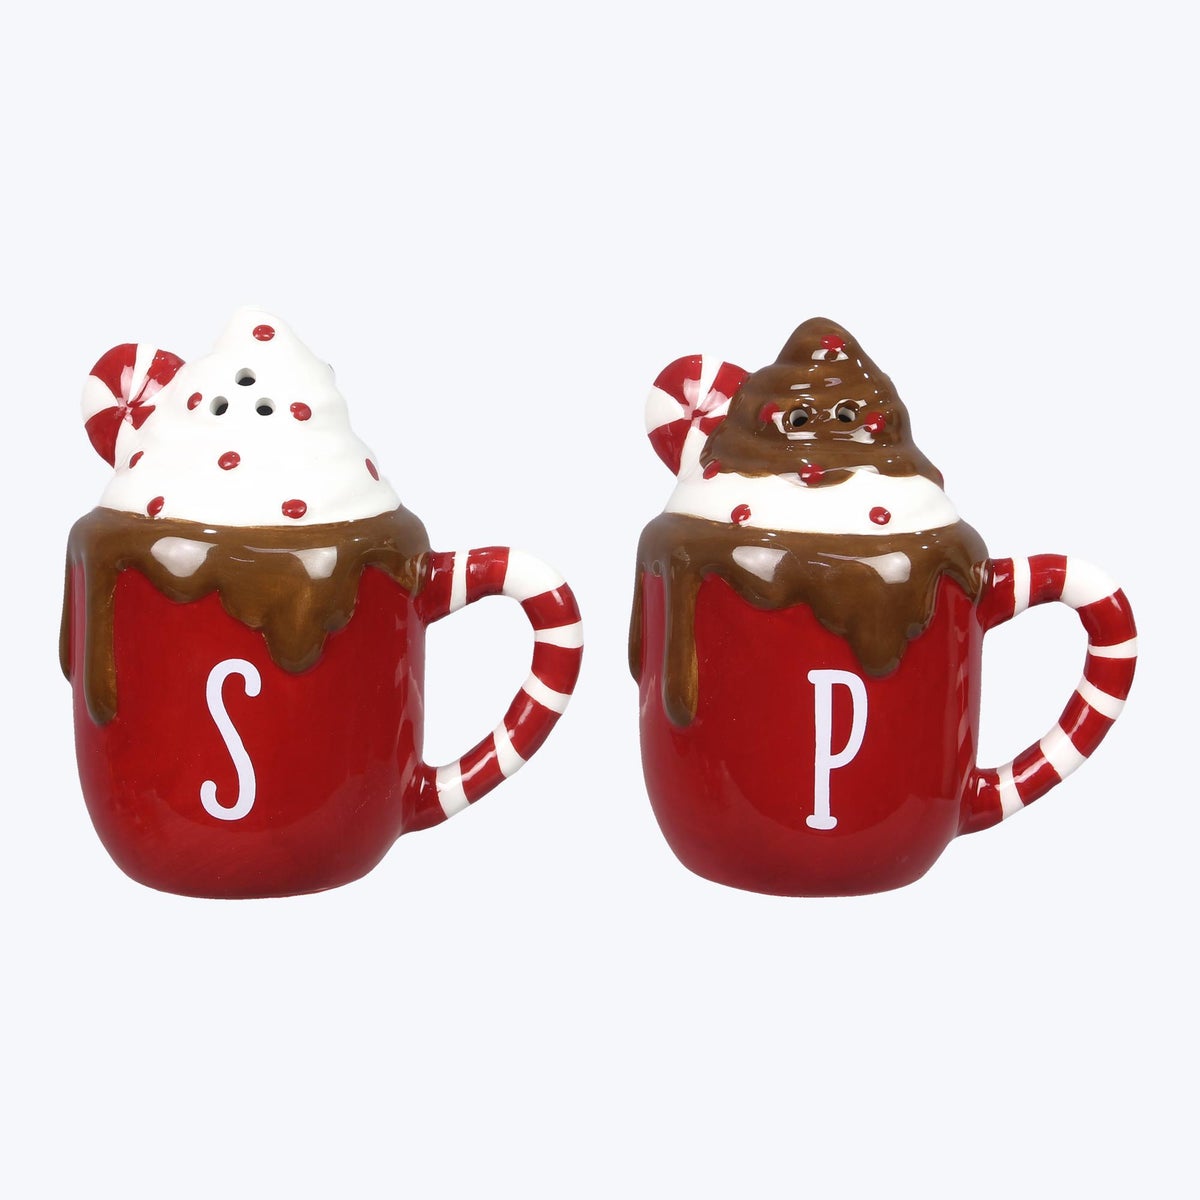 Ceramic Cocoa and Cookie Salt and Pepper Set of 2. S/P